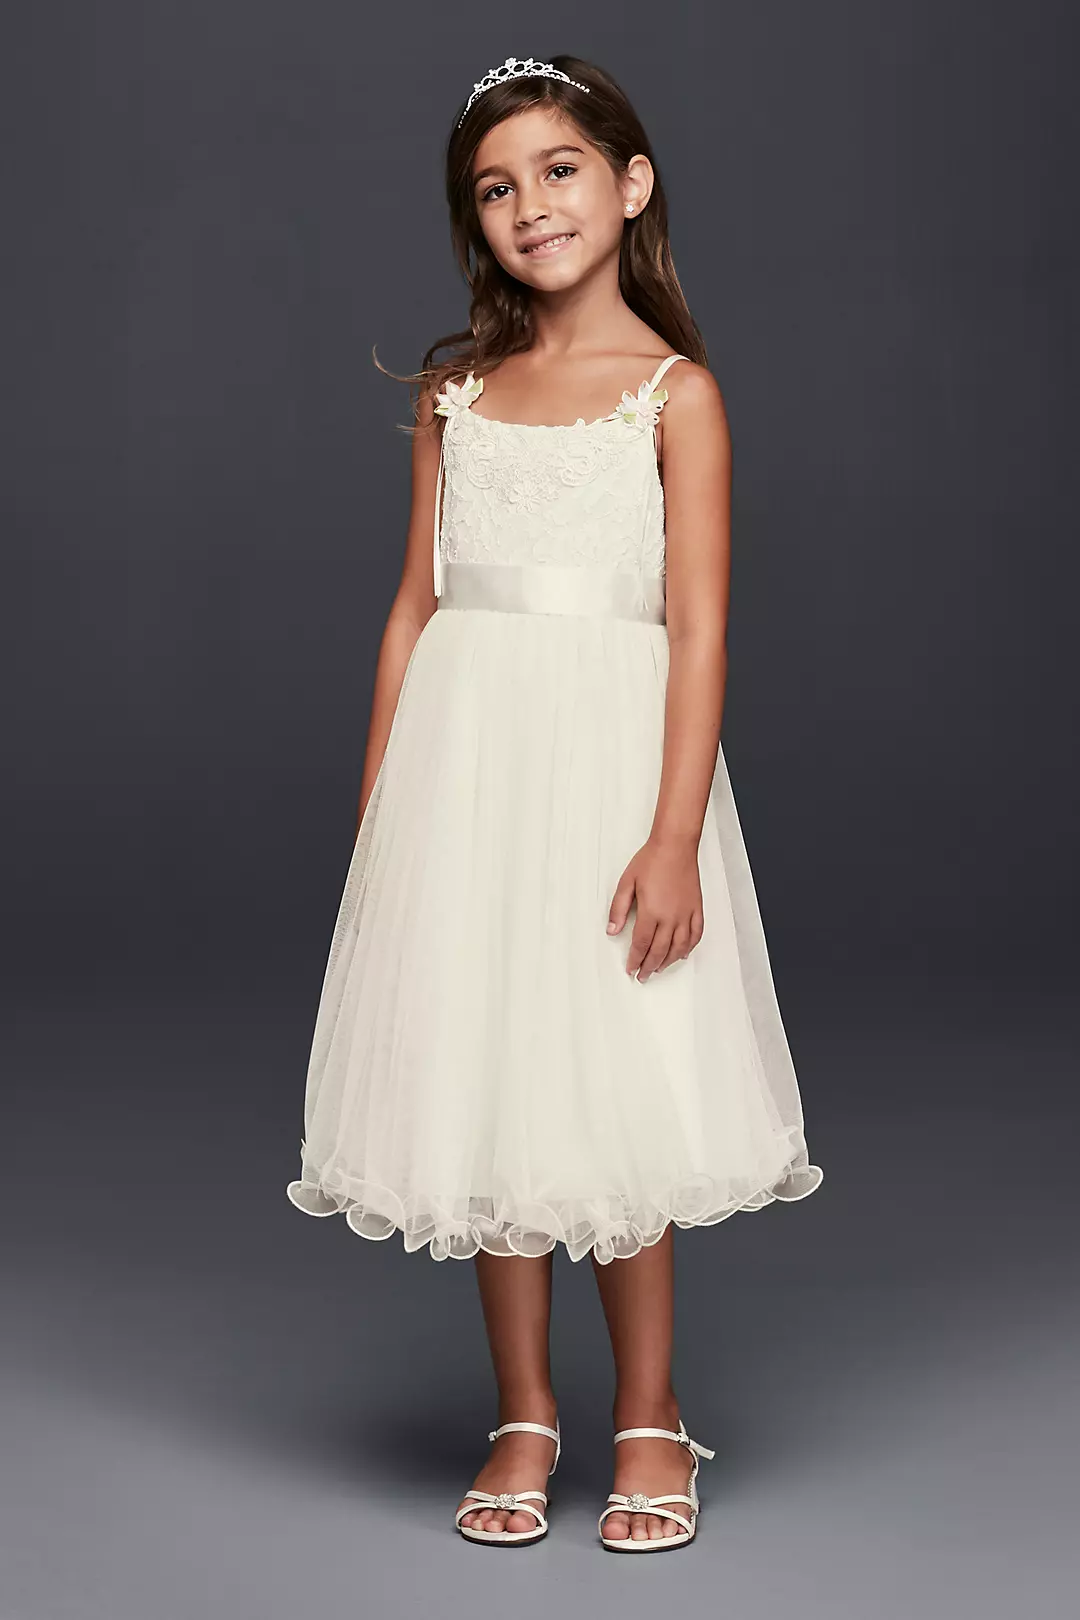 Curly Tulle Flower Girl Dress with Rosettes Image